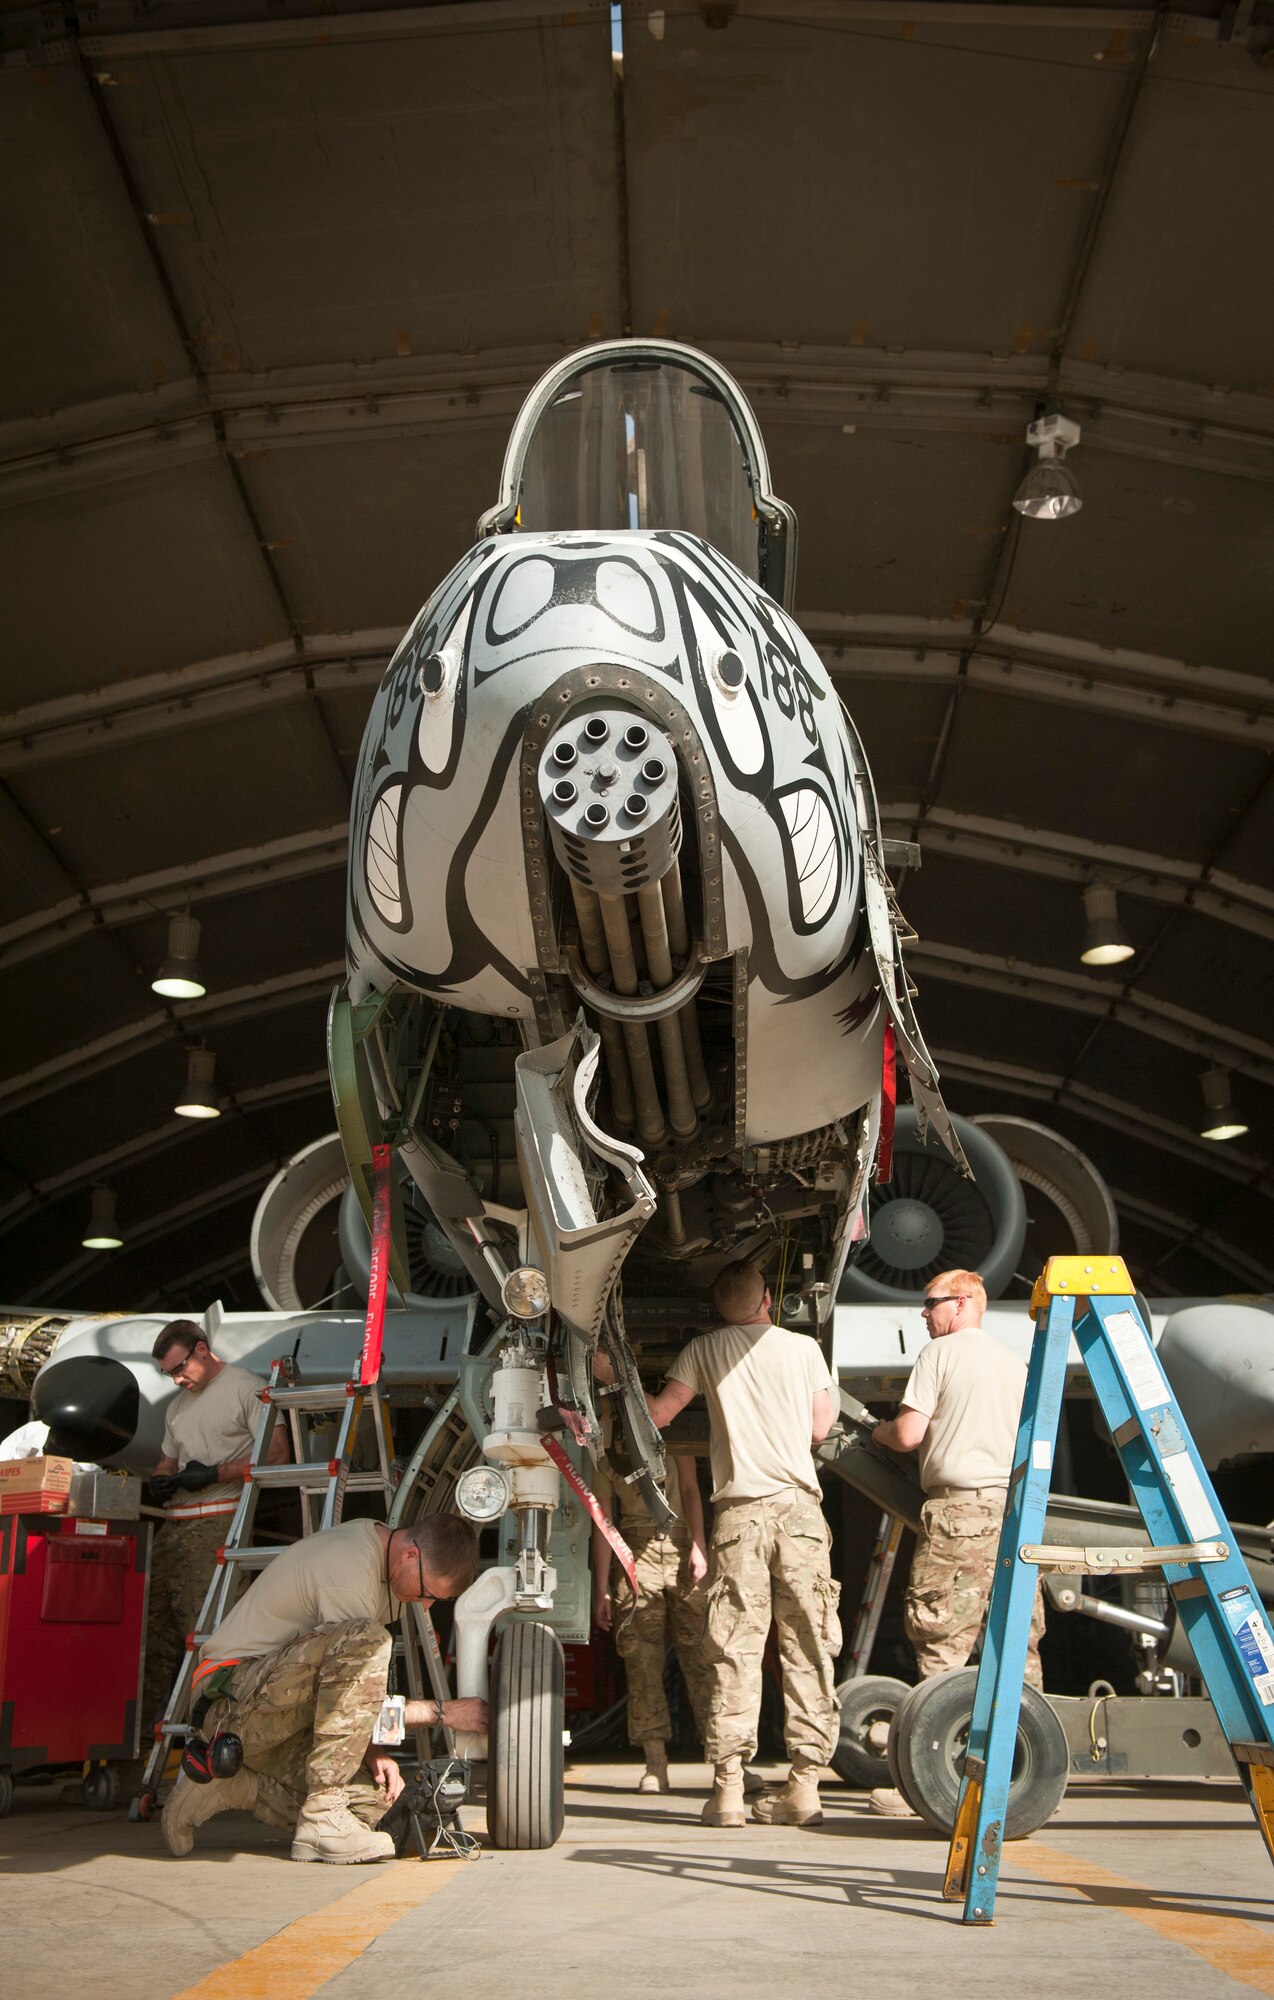 Maintainers with the 455th Expeditionary Maintenance Squadron work on a U.S. Air Force A-10 Thunderbolt II during phase maintenance at Bagram Airfield, Afghanistan, August 8, 2012. While deployed, USAF aircraft endure increased flight hours and more combat maneuvers, which increases the need for routine maintenance and inspections. (U.S. Air Force Photo/Capt. Raymond Geoffroy)